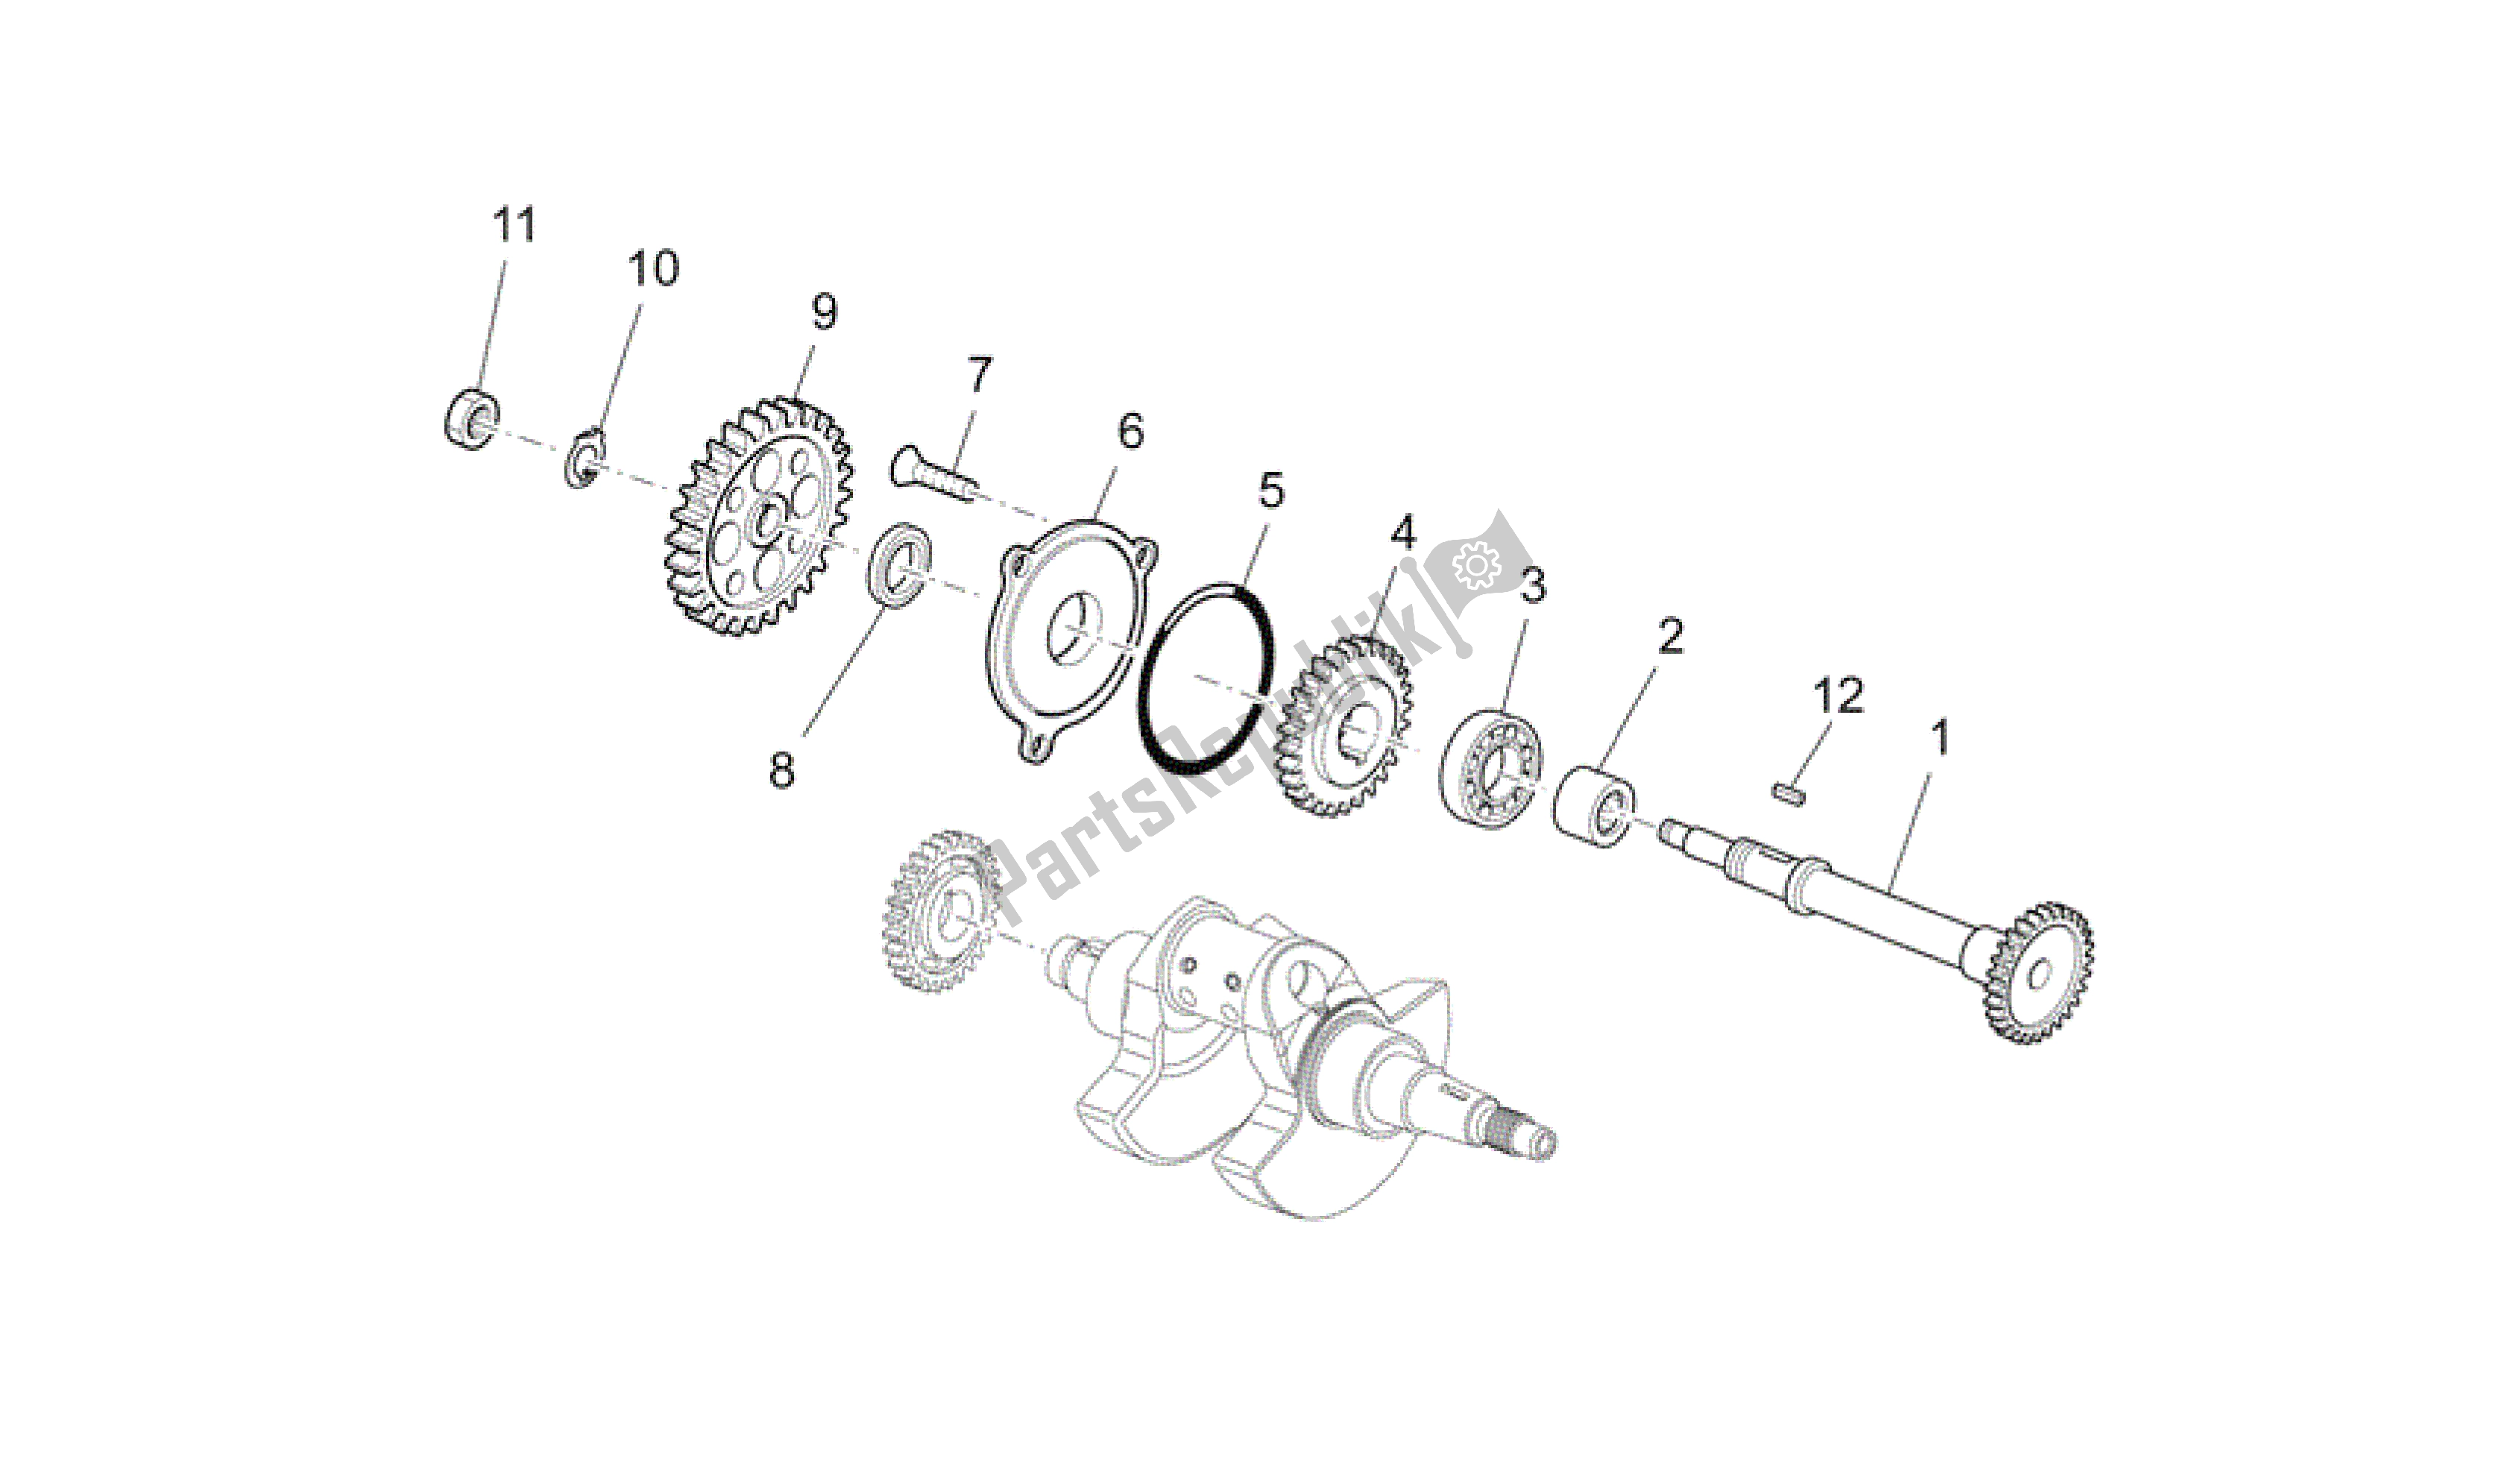 All parts for the Transmission Shaft of the Aprilia SXV 450 2009 - 2011